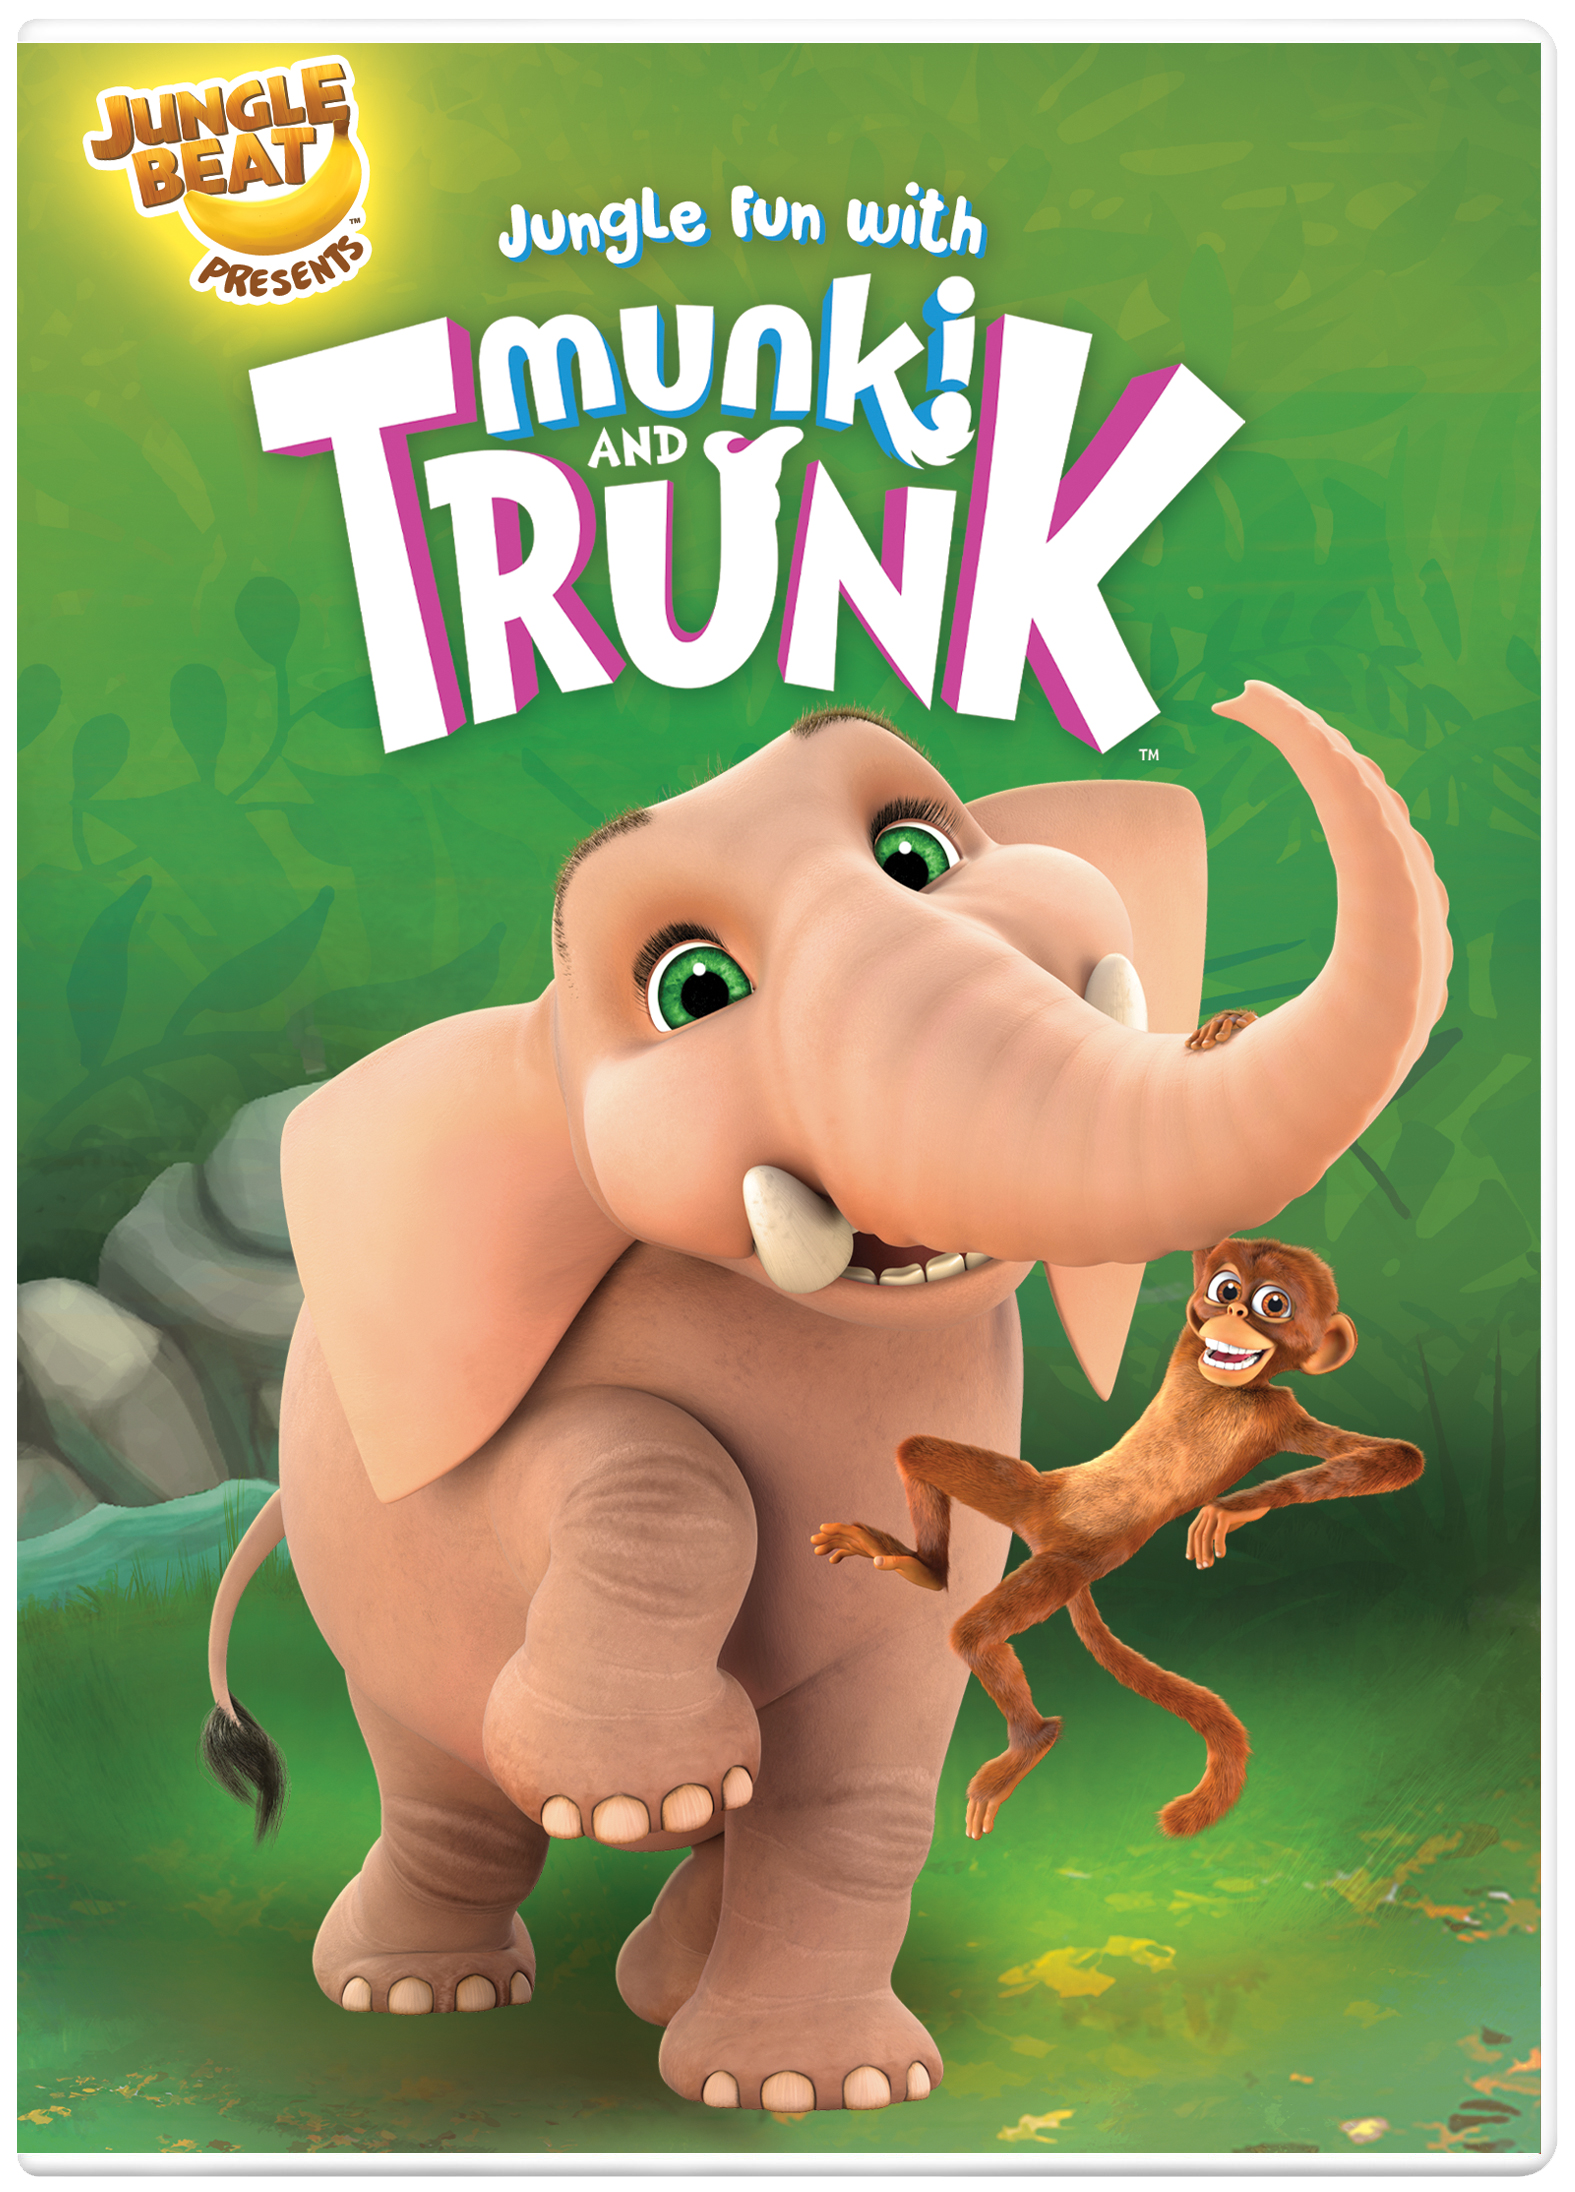 Jungle Fun with Munki and Trunk * Adorable selection of stories that teaches lessons about nature and friendship